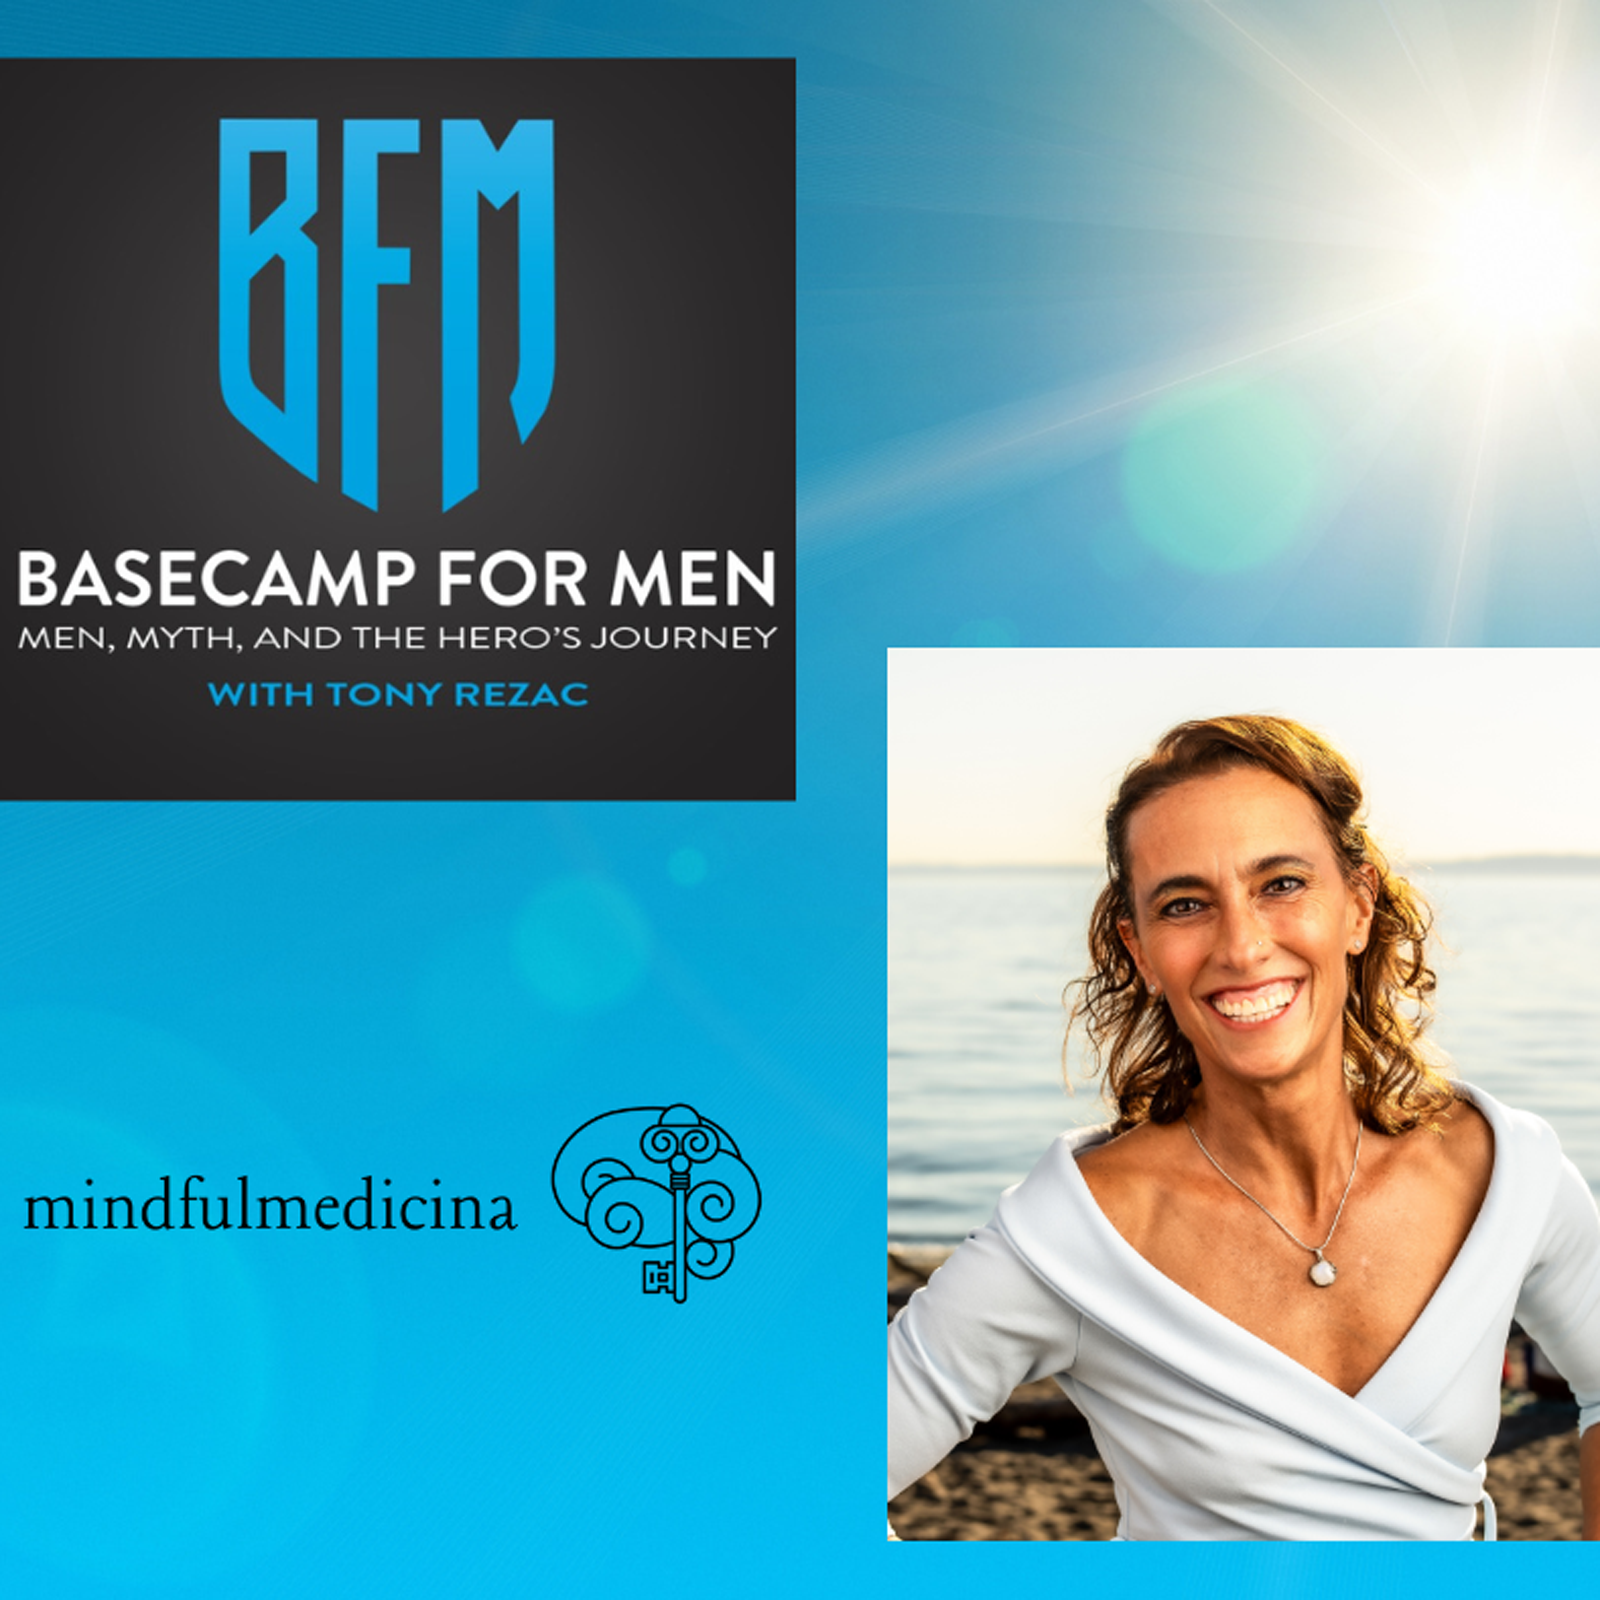 The Sun is Our Ally: with Tony Rezac on Basecamp For Men